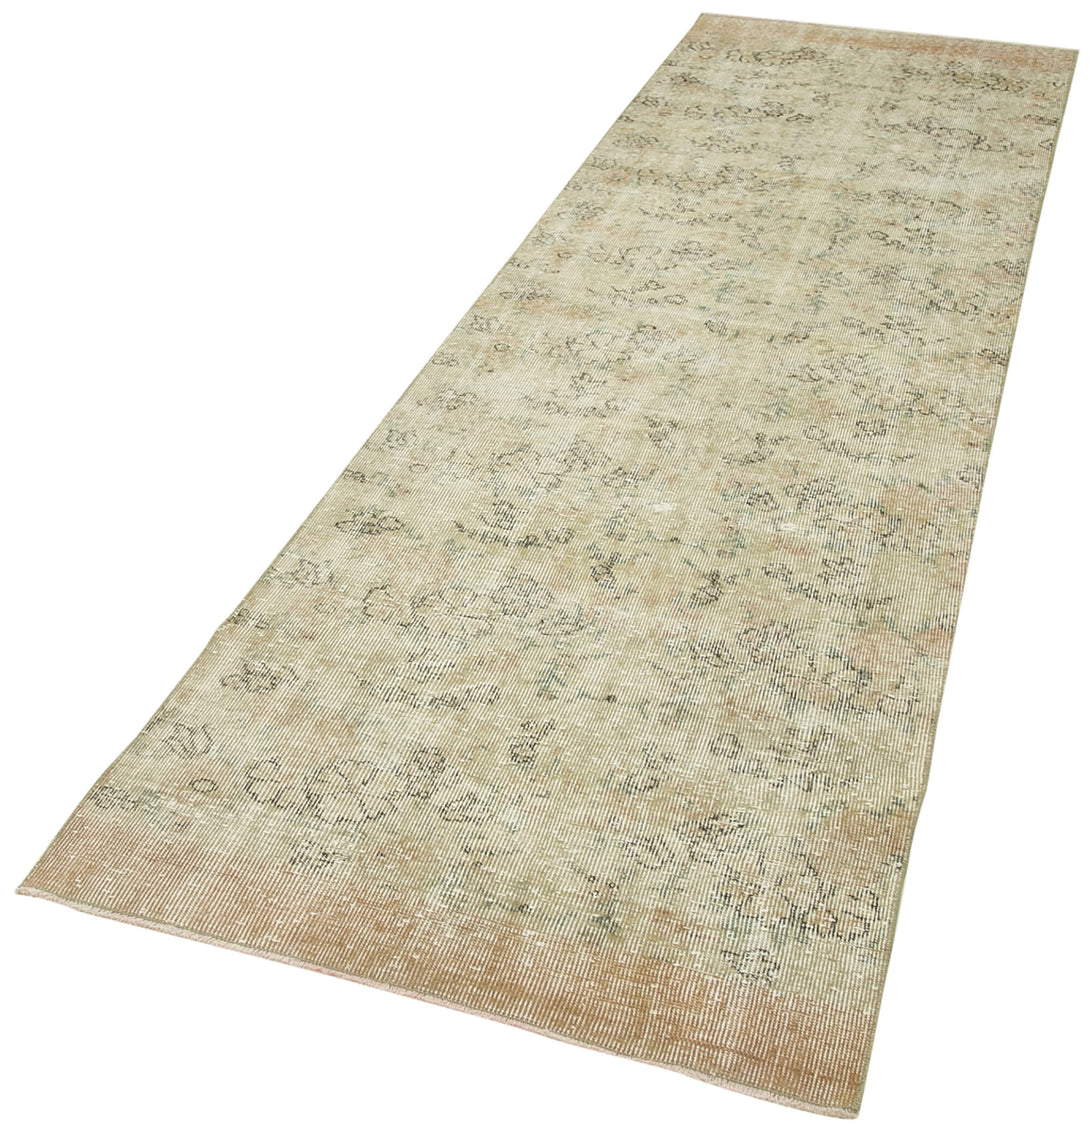 Handmade Overdyed Runner > Design# OL-AC-38196 > Size: 3'-1" x 10'-1", Carpet Culture Rugs, Handmade Rugs, NYC Rugs, New Rugs, Shop Rugs, Rug Store, Outlet Rugs, SoHo Rugs, Rugs in USA